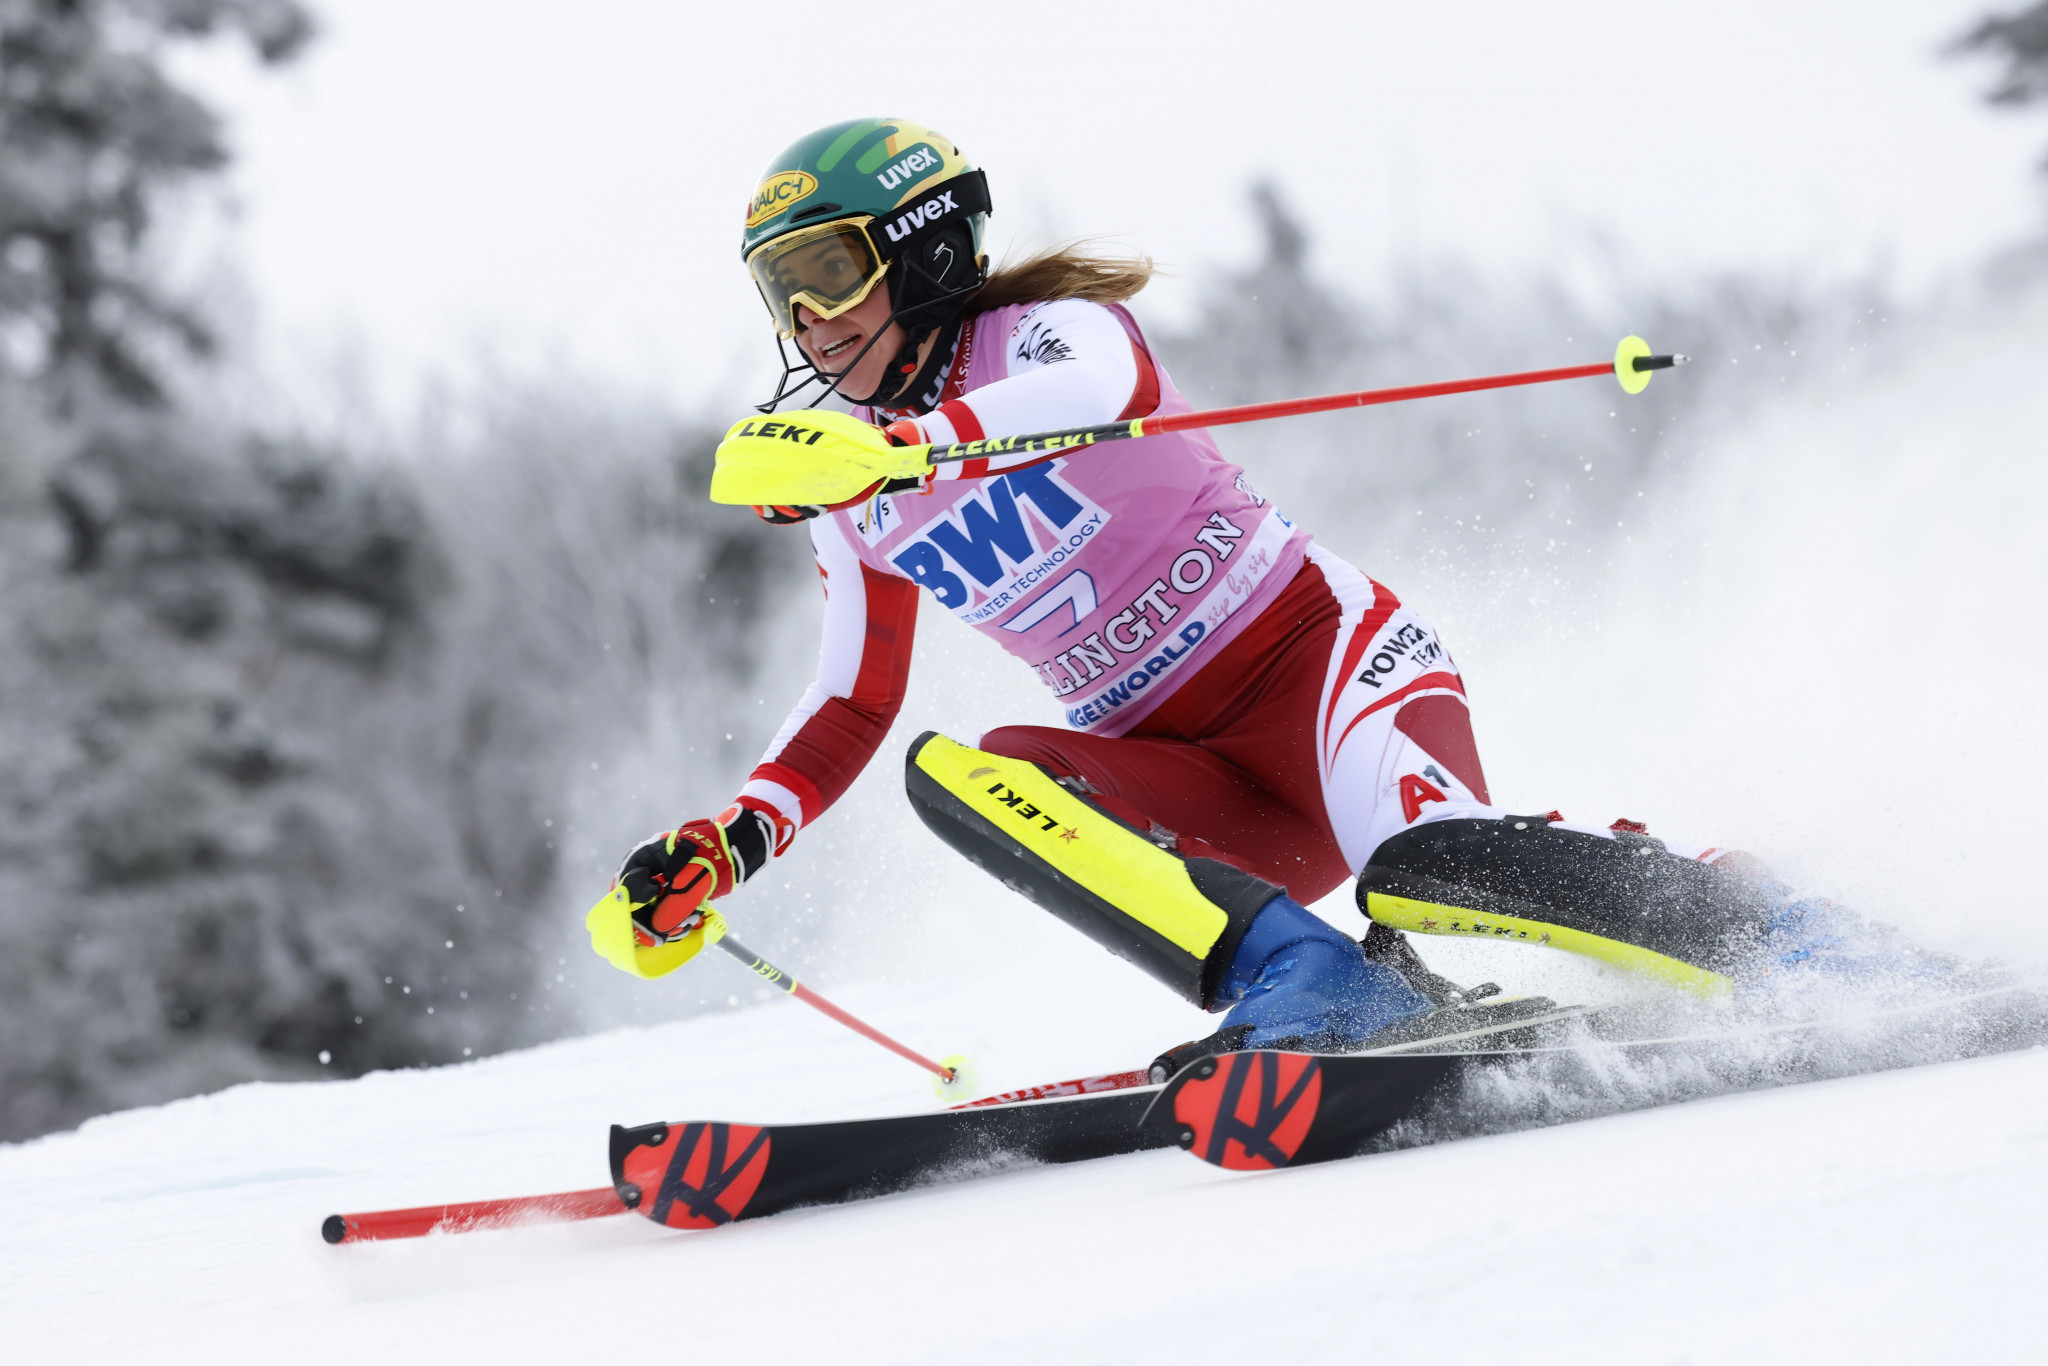 Liensberger and Robinson add to women's FIS Alpine Ski World Cup positive COVID-19 tests